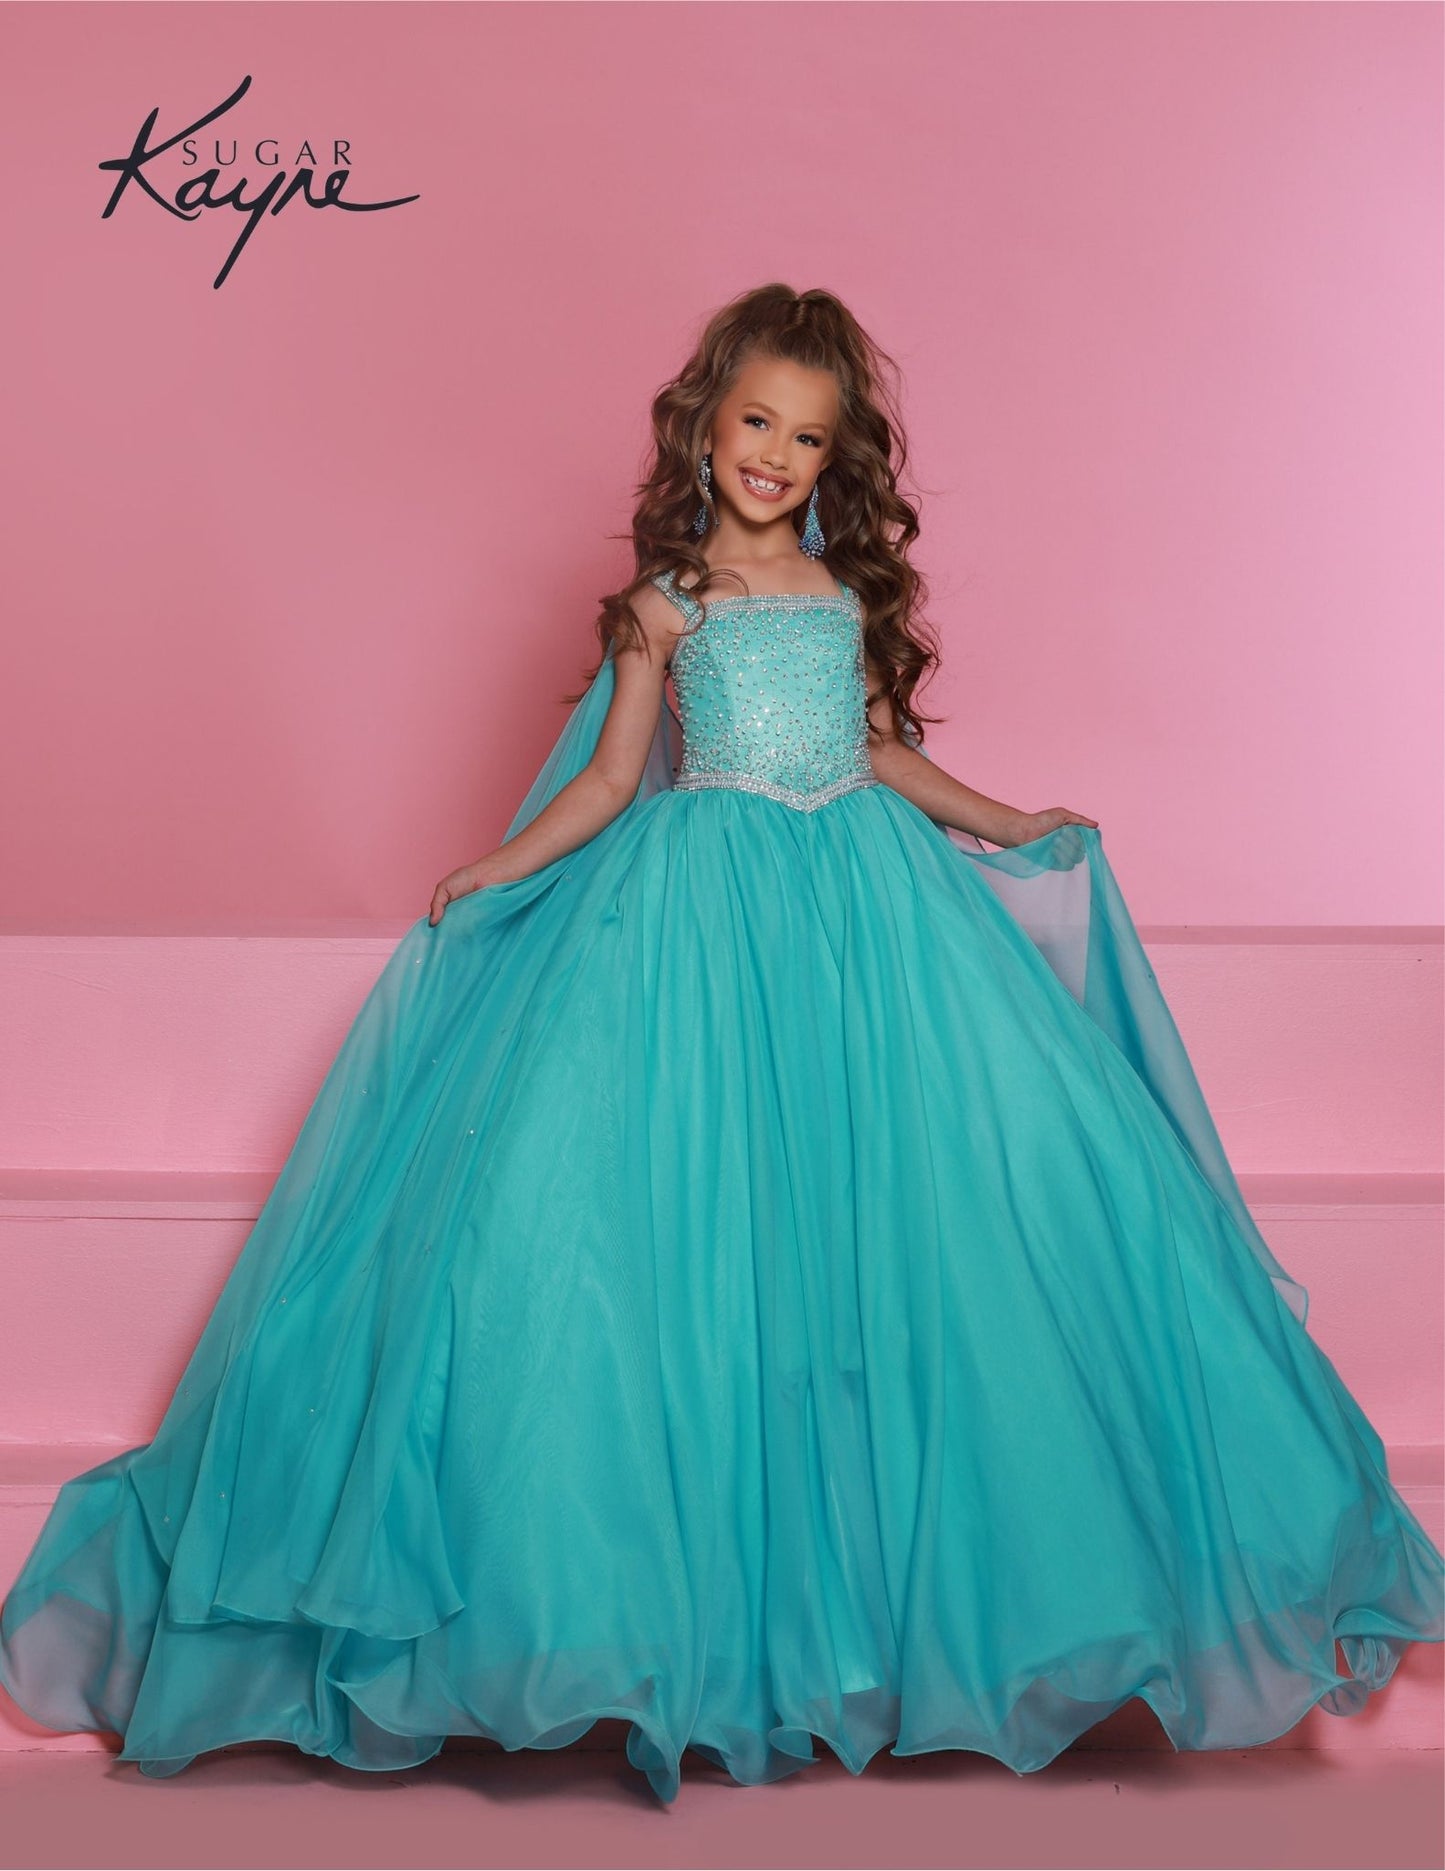 Sugar Kayne C329 Ocean Pageant Dress features a chiffon skirt, semi sweetheart neckline encrusted with rhinestones and wide straps with a cape.